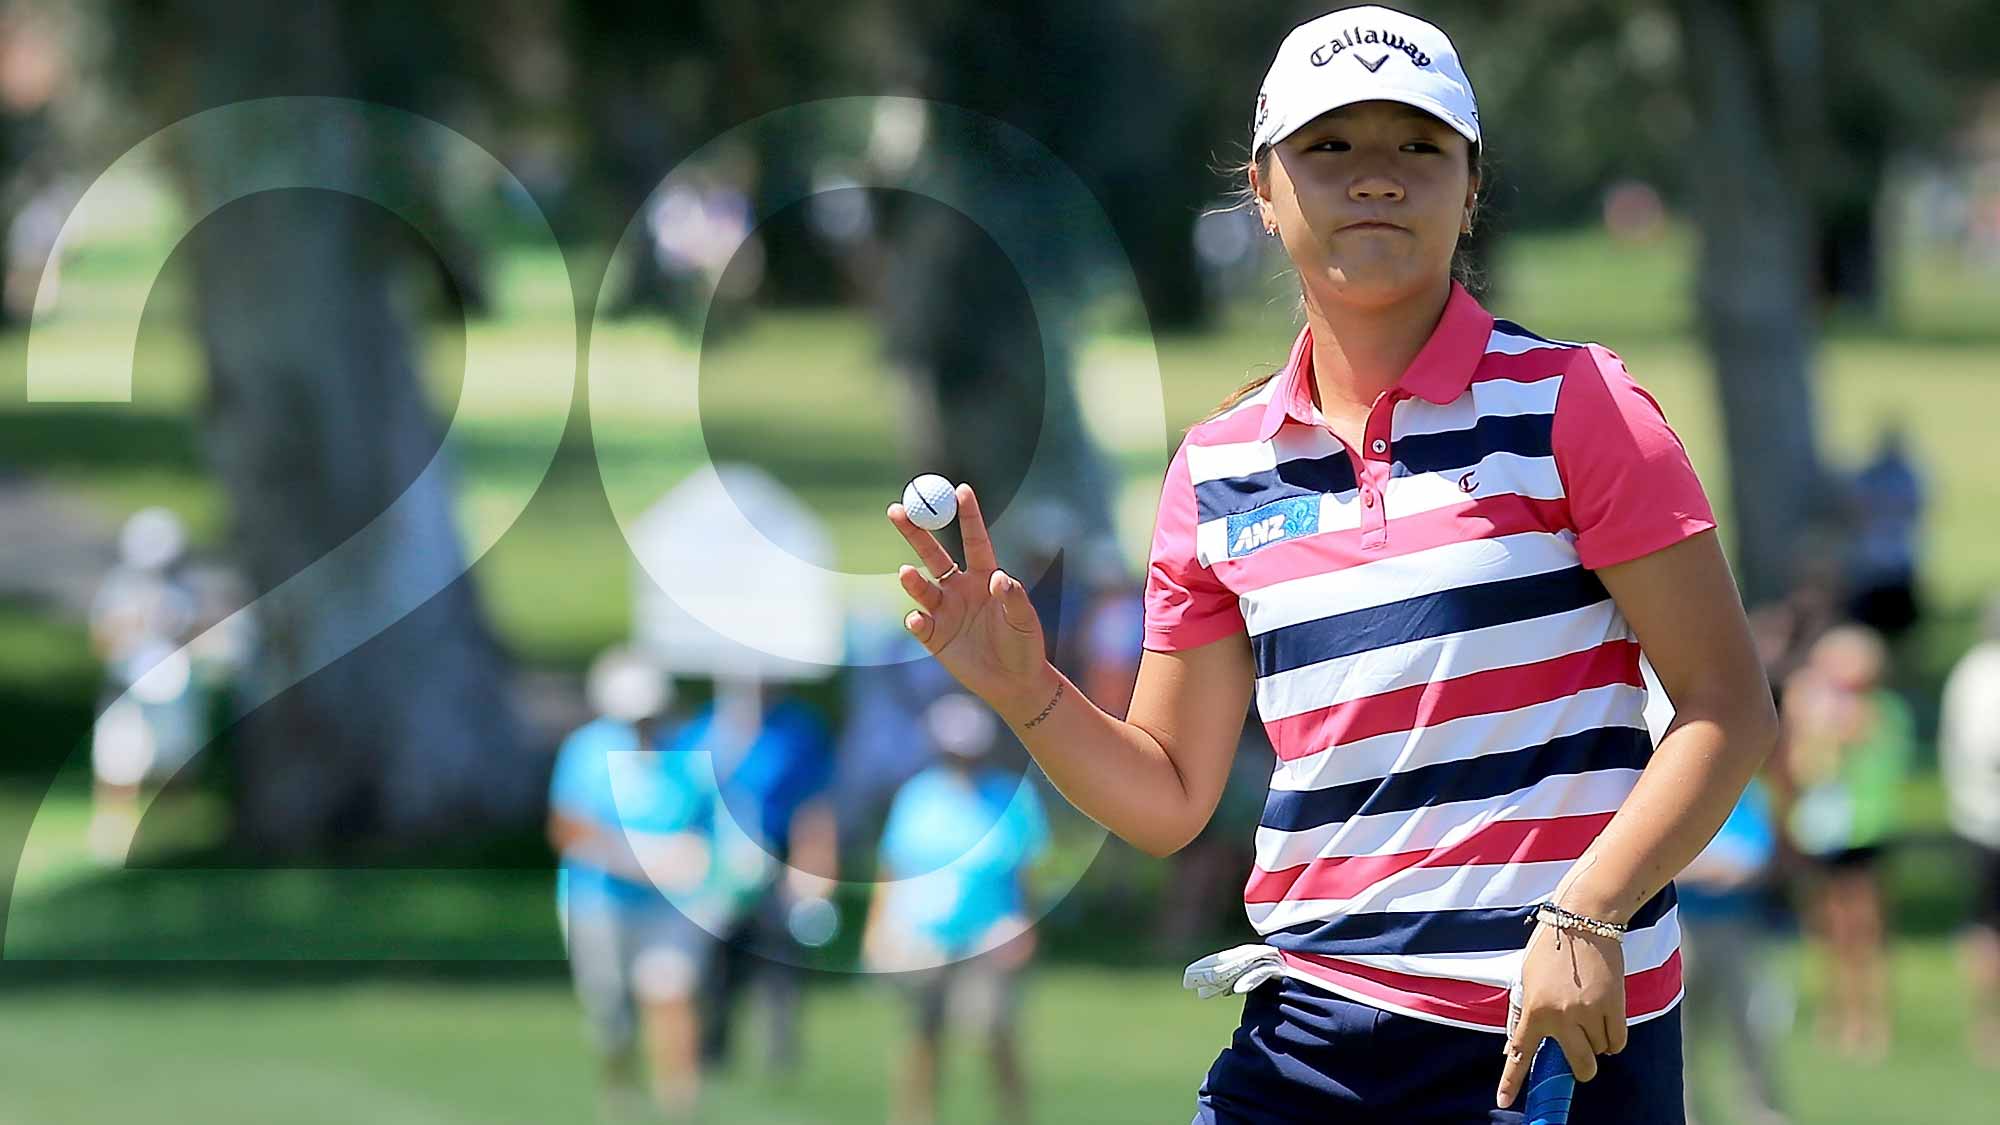 Lydia Ko ties Annika Sorenstam's record of 29 consecutive rounds under par with a 1-under first round at the 2015 ANA Inspiration